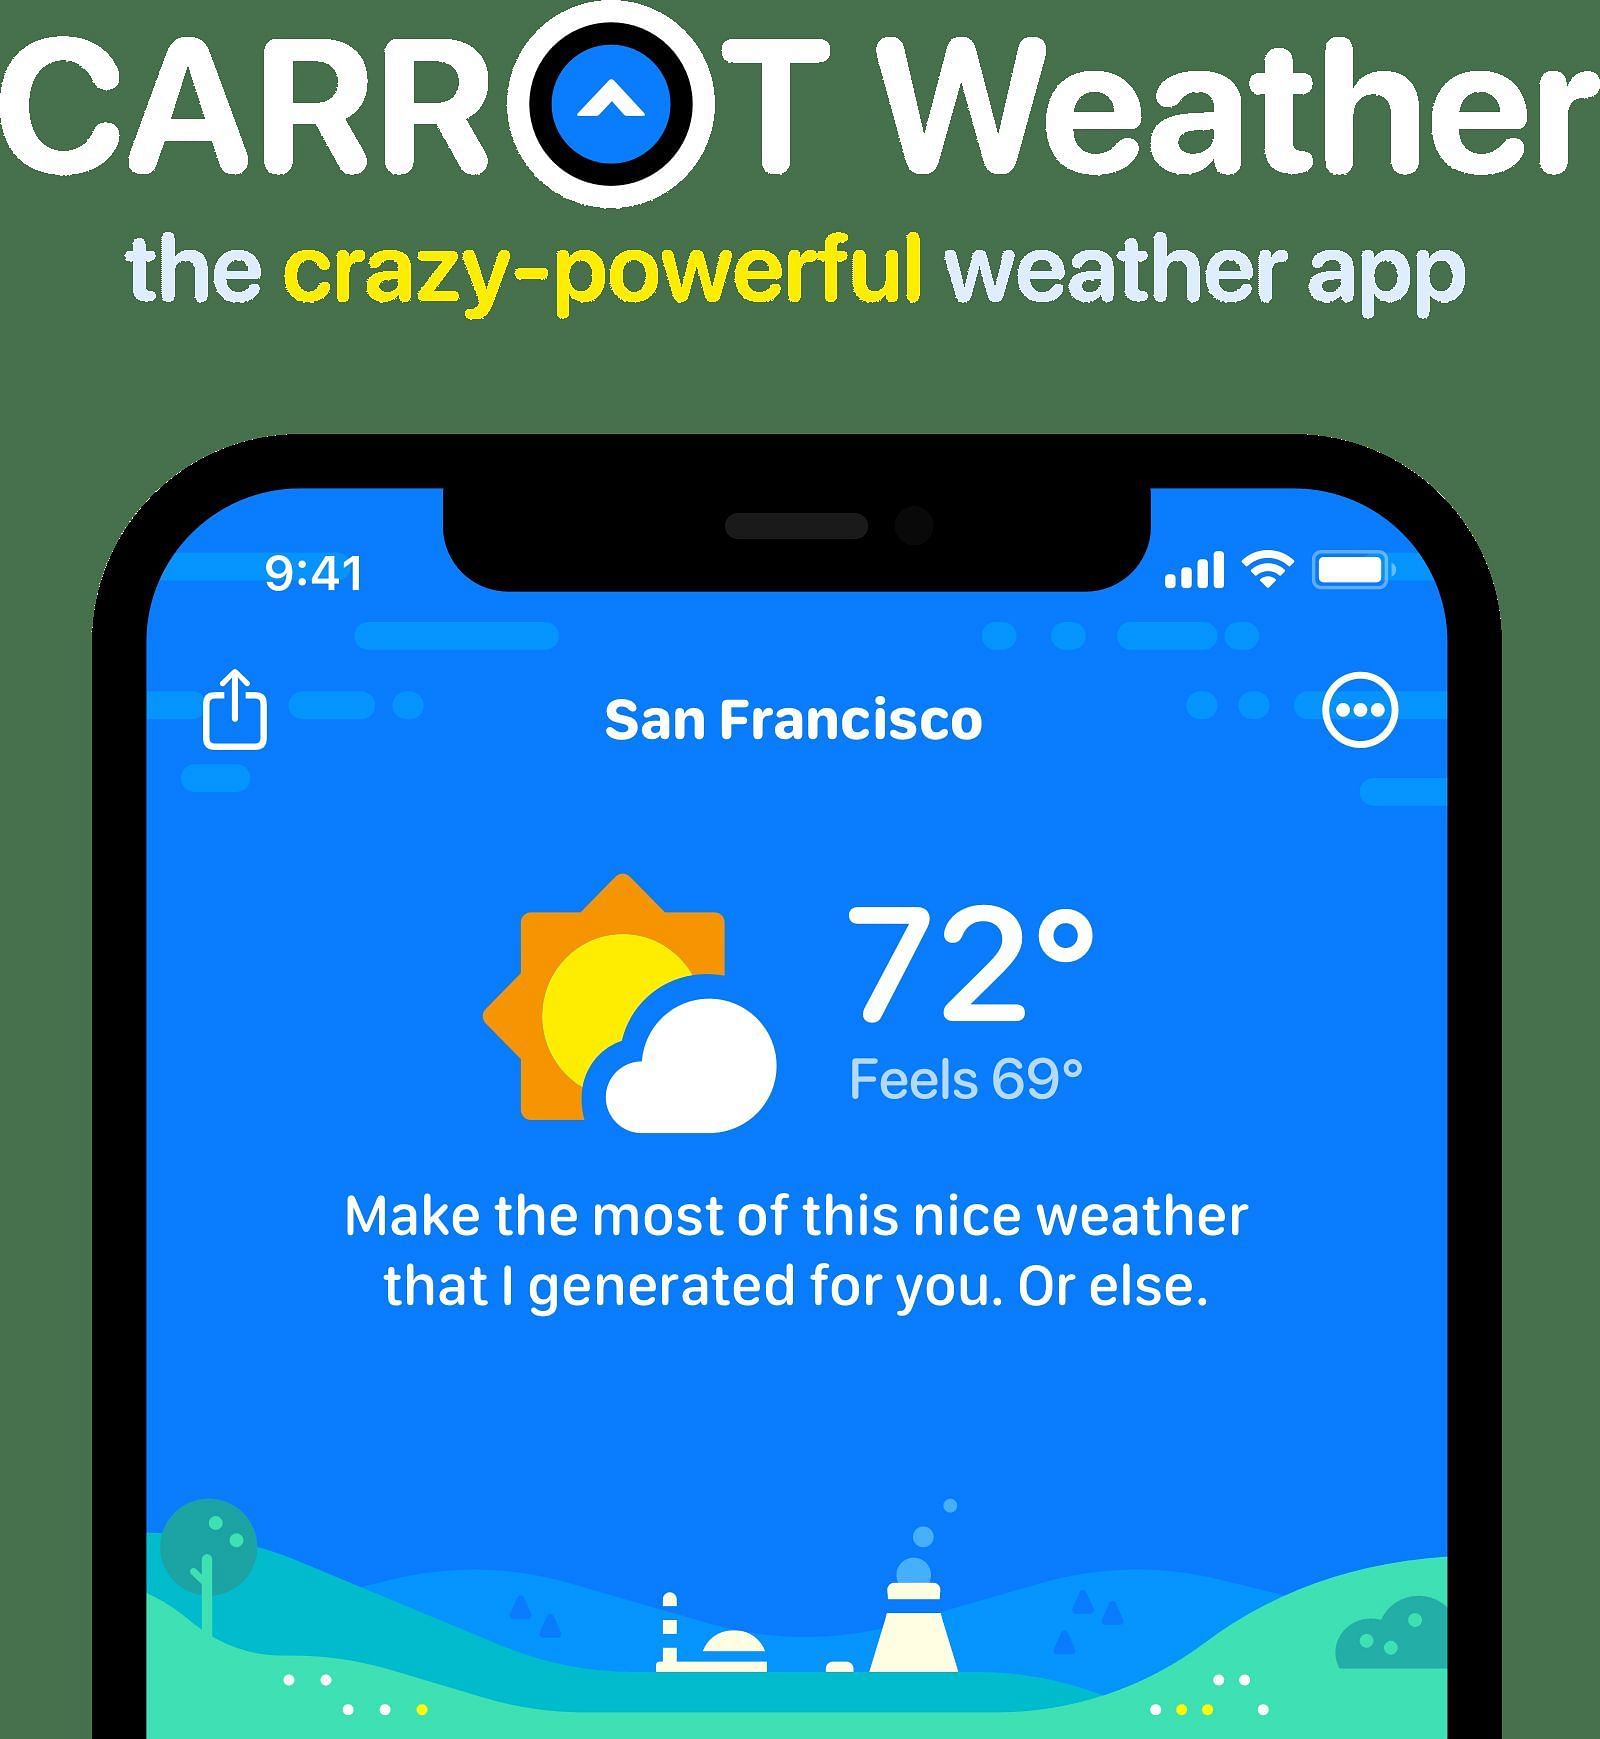 Meet the Carrot Weather for Android (Image via https://www.meetcarrot.com/weather/)